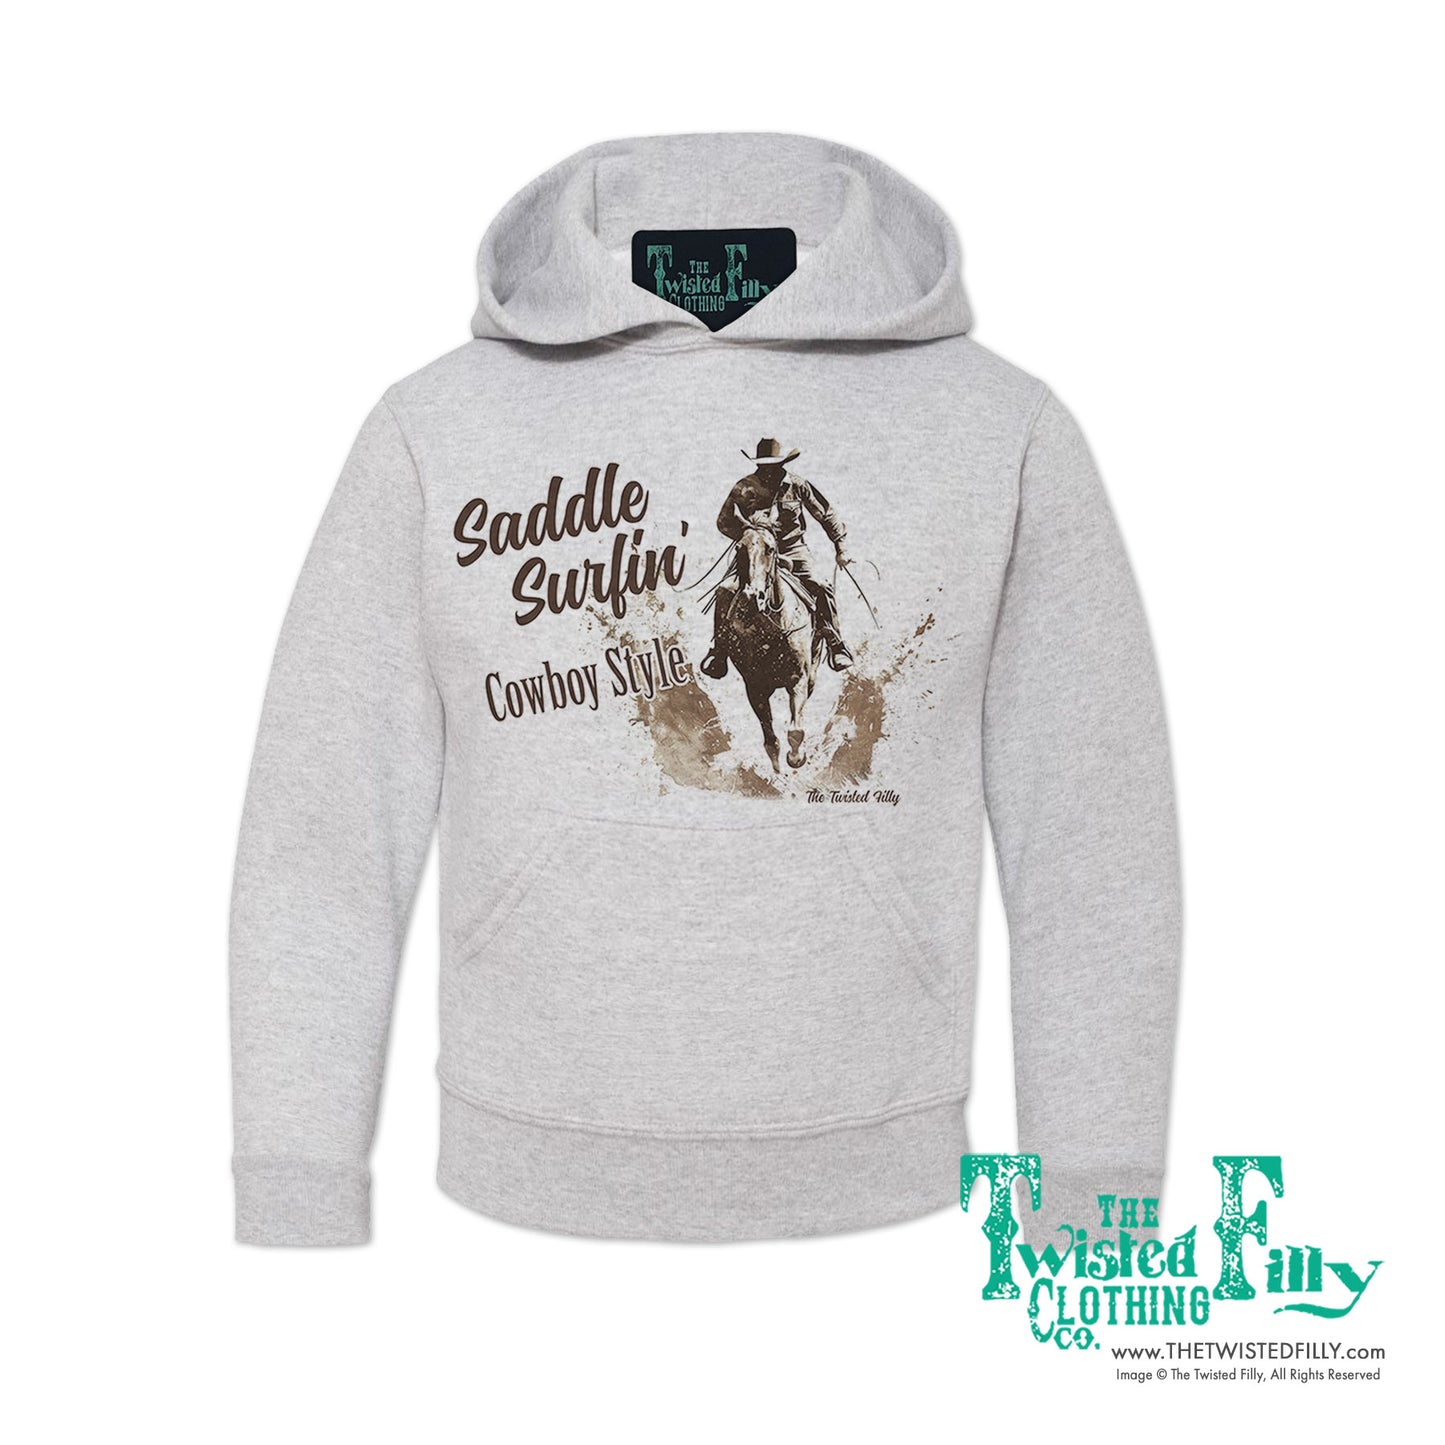 Saddle Surfin' Cowboy Style - Youth Boys Hoodie - Assorted Colors